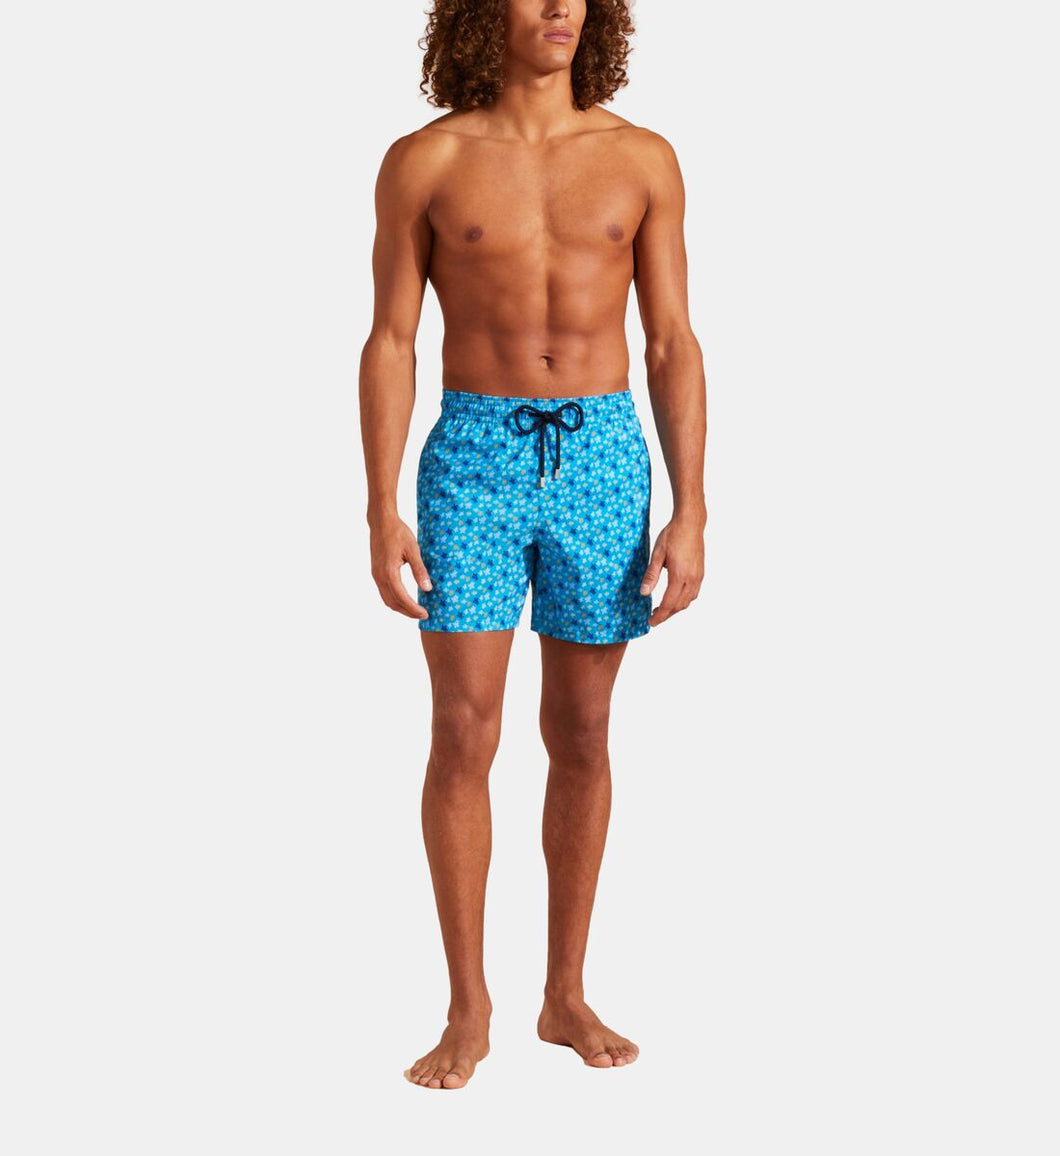 MEN ULTRA-LIGHT AND PACKABLE SWIM TRUNKS MICRO RONDE DES TORTUES RAINBOW